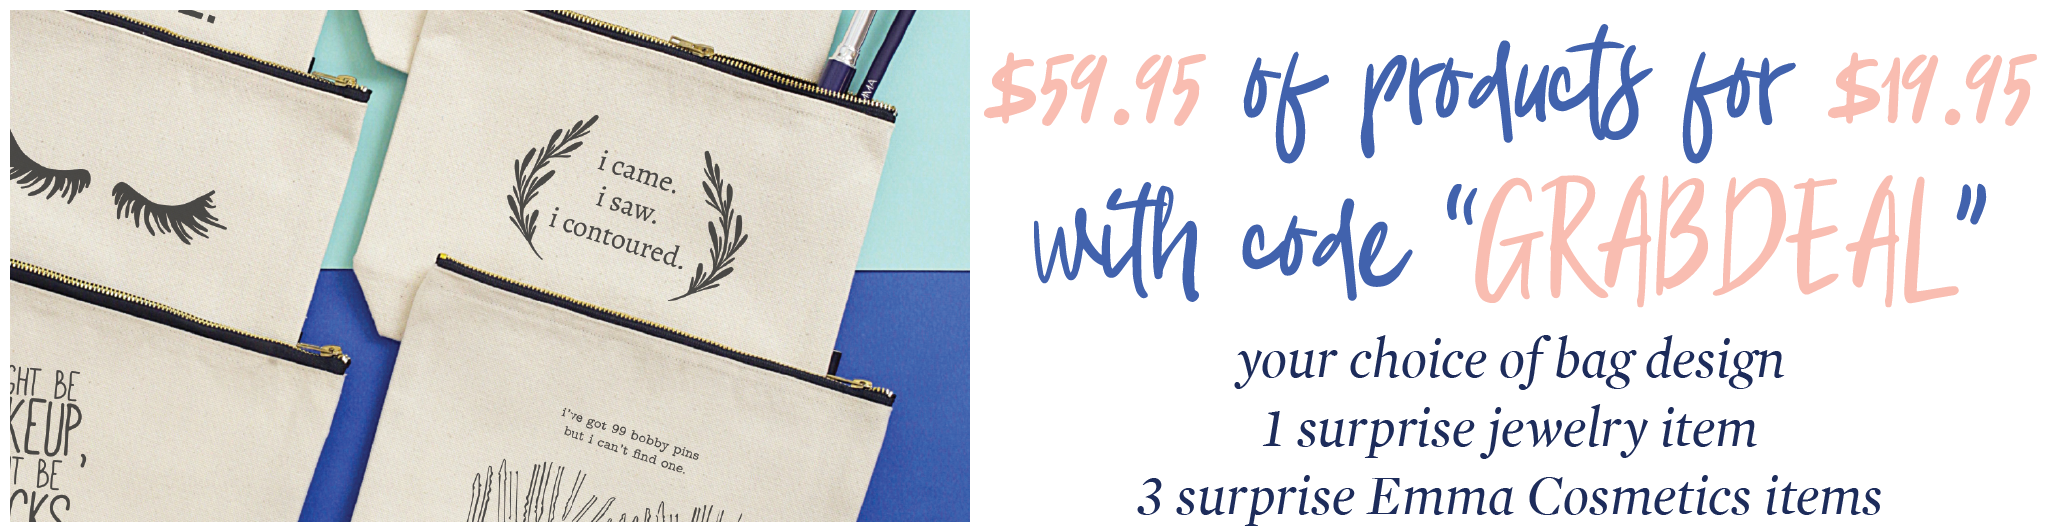 Cents of Style 2 For Tuesday – Cosmetic and Jewelry Grab Bag – $59.95 value For $19.95! FREE SHIPPING!